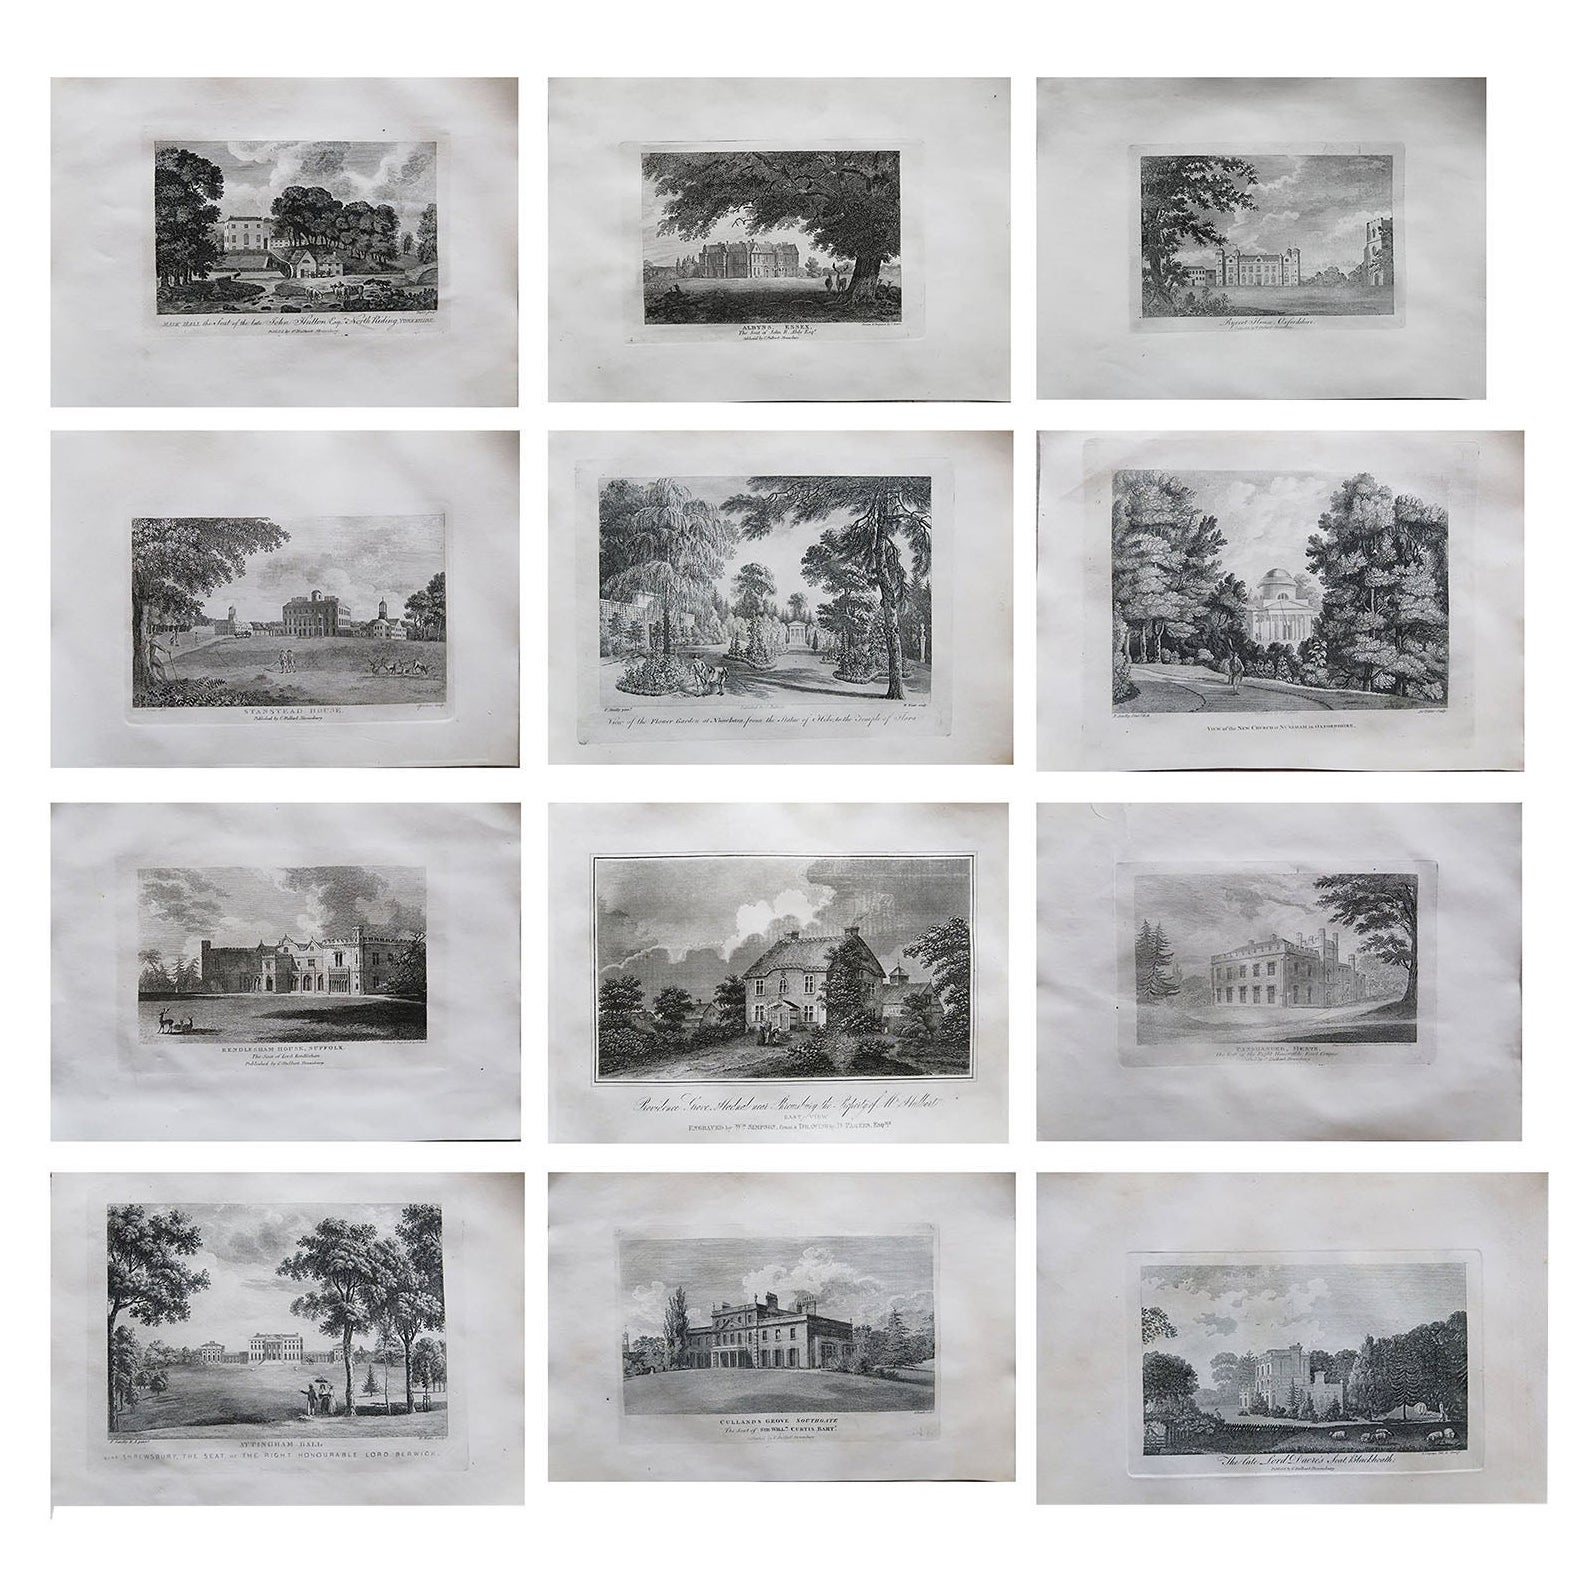 Set of 12 Antique Prints of English Country Houses and Gardens, circa 1800